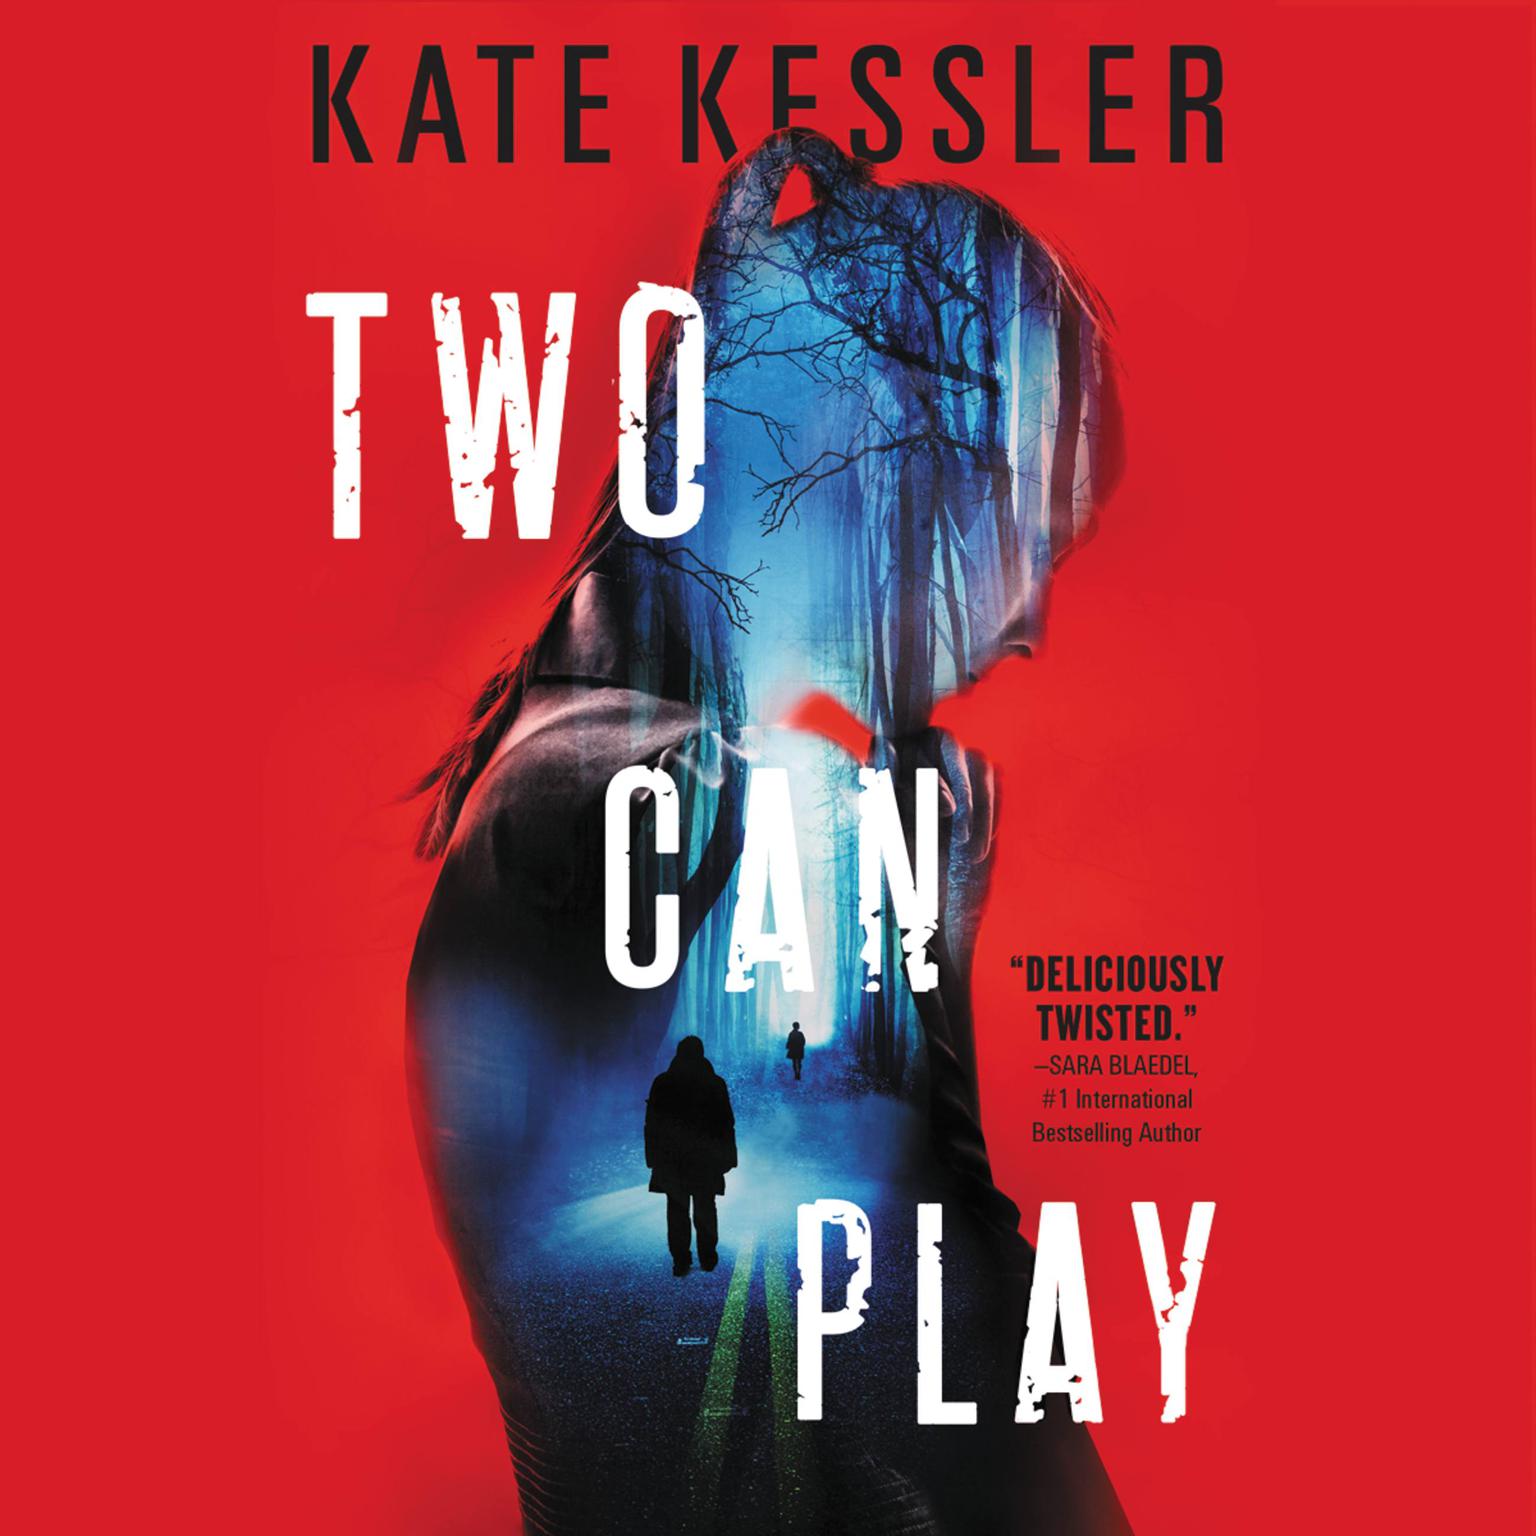 Two Can Play Audiobook, by Kate Kessler